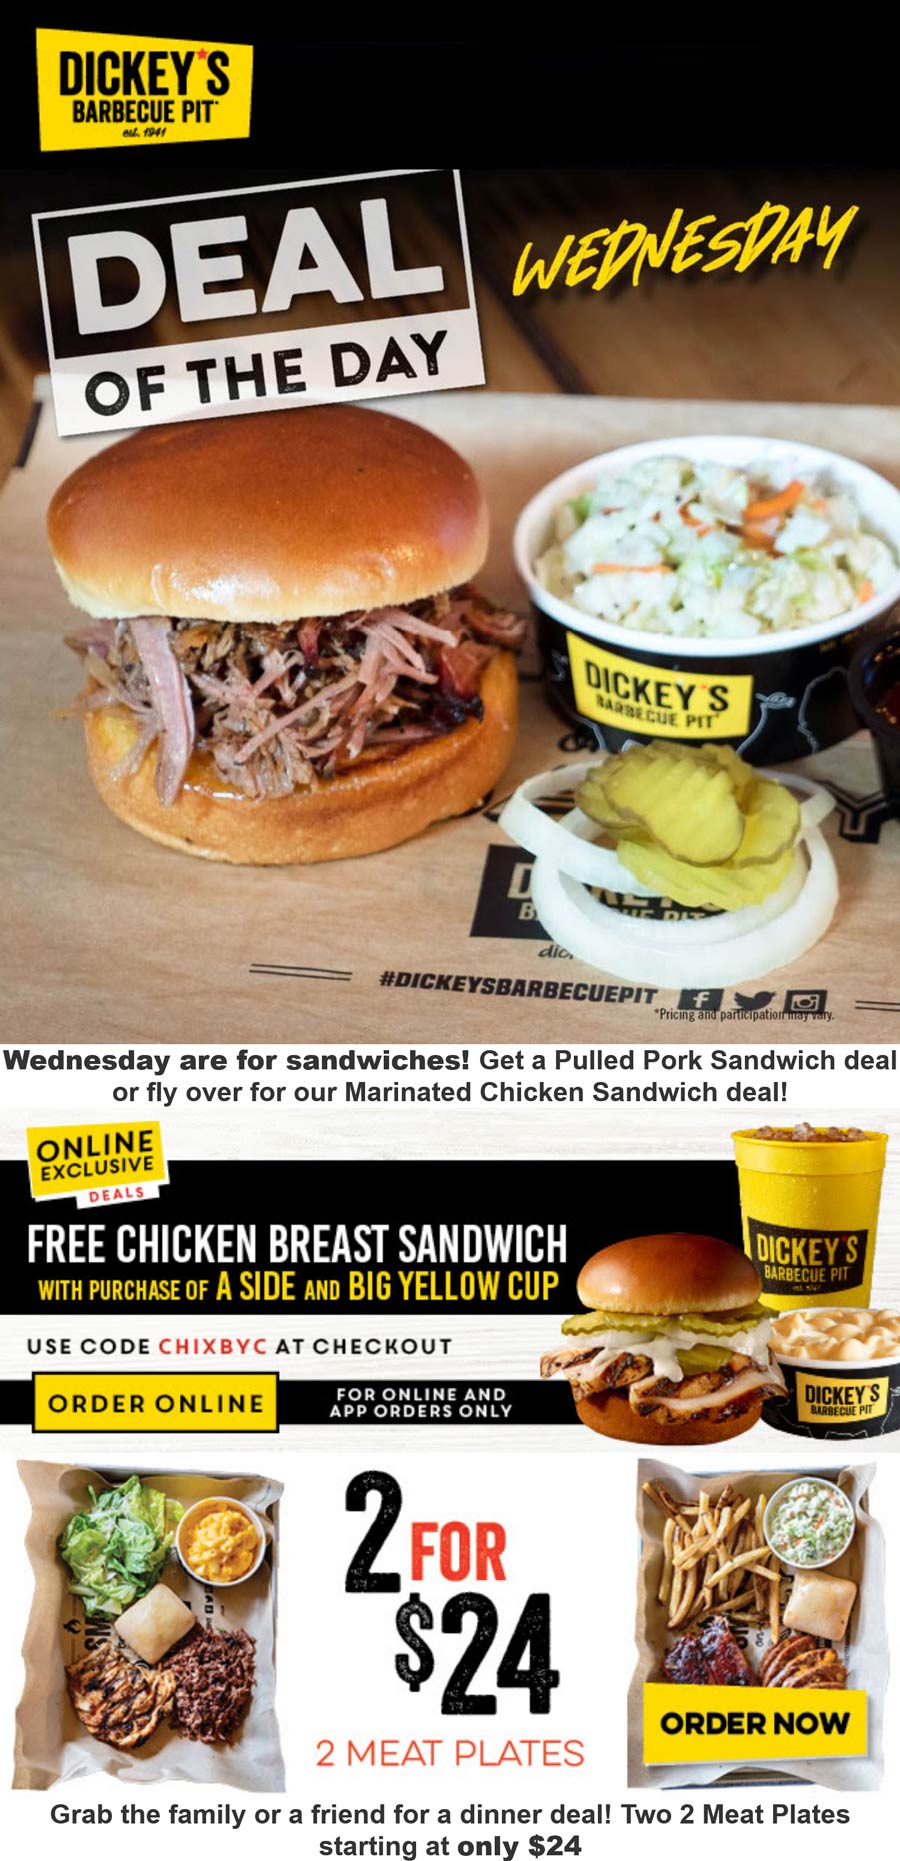 Dickeys Barbecue Pit restaurants Coupon  Free chicken sandwich with your side & cup today at Dickeys Barbecue Pit via promo code CHIXBYC #dickeysbarbecuepit 